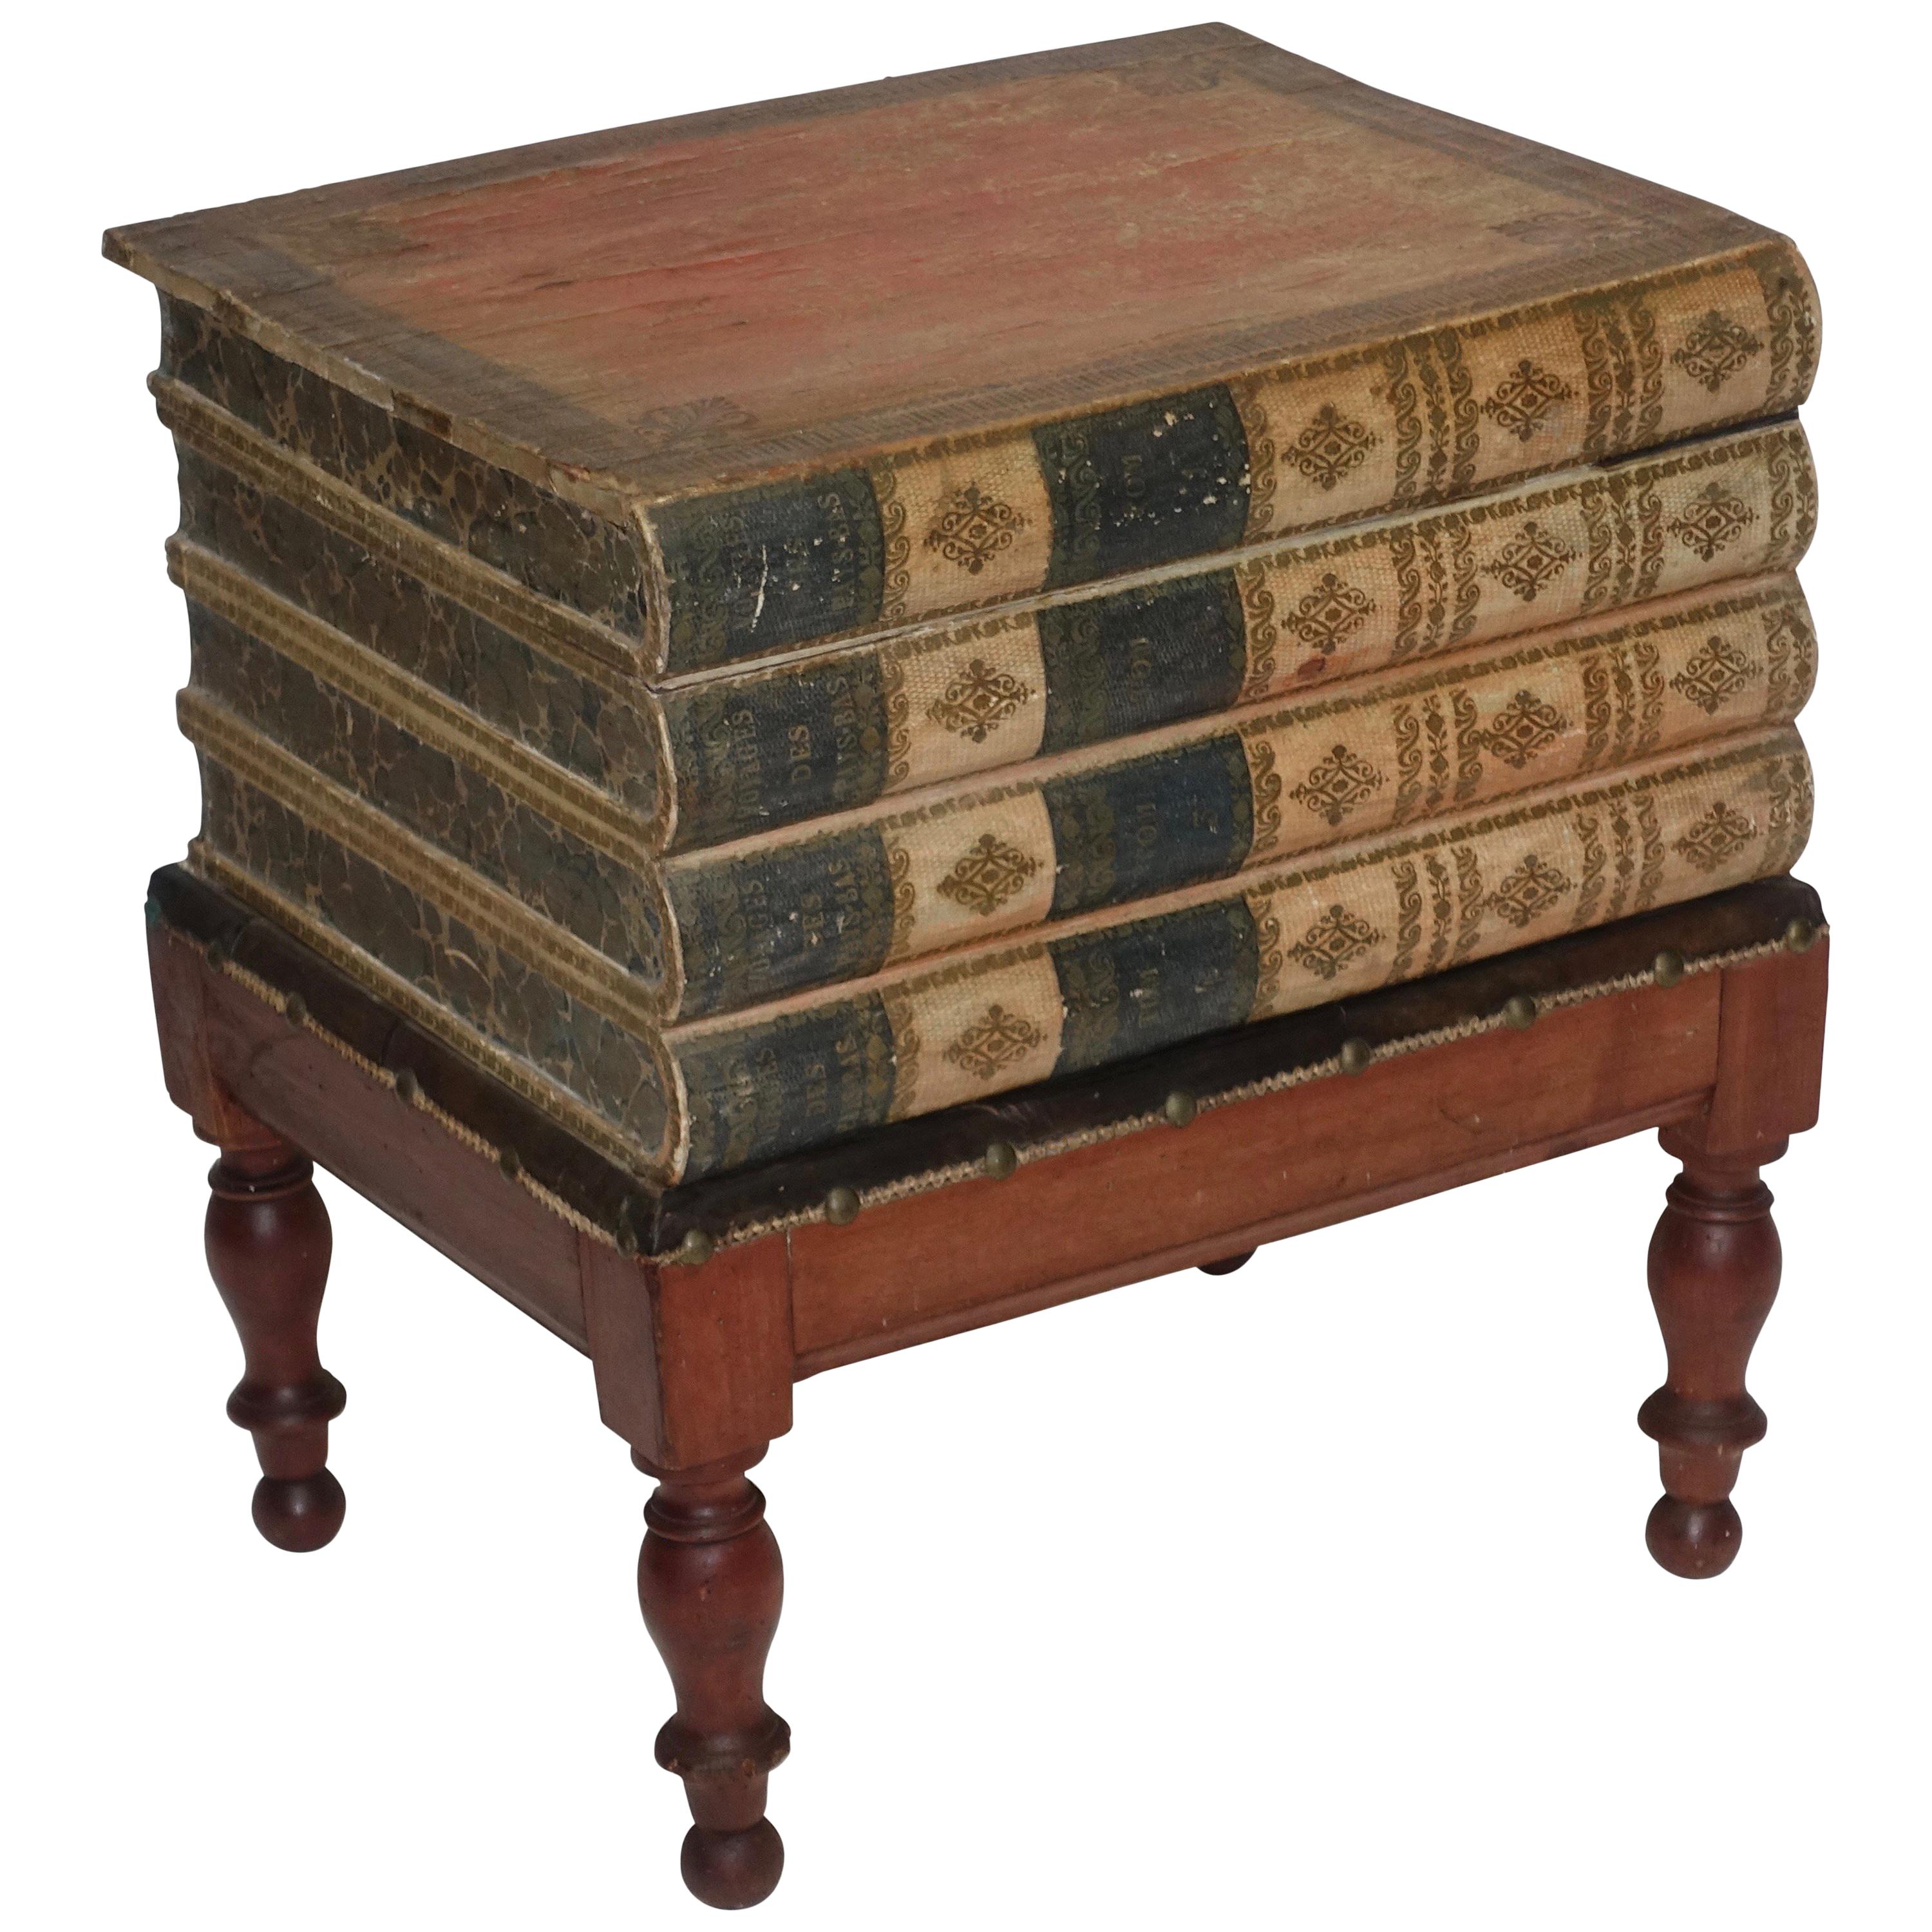 Regency Leather Faux Book Box on Painted Stand or End Table, English, circa 1830